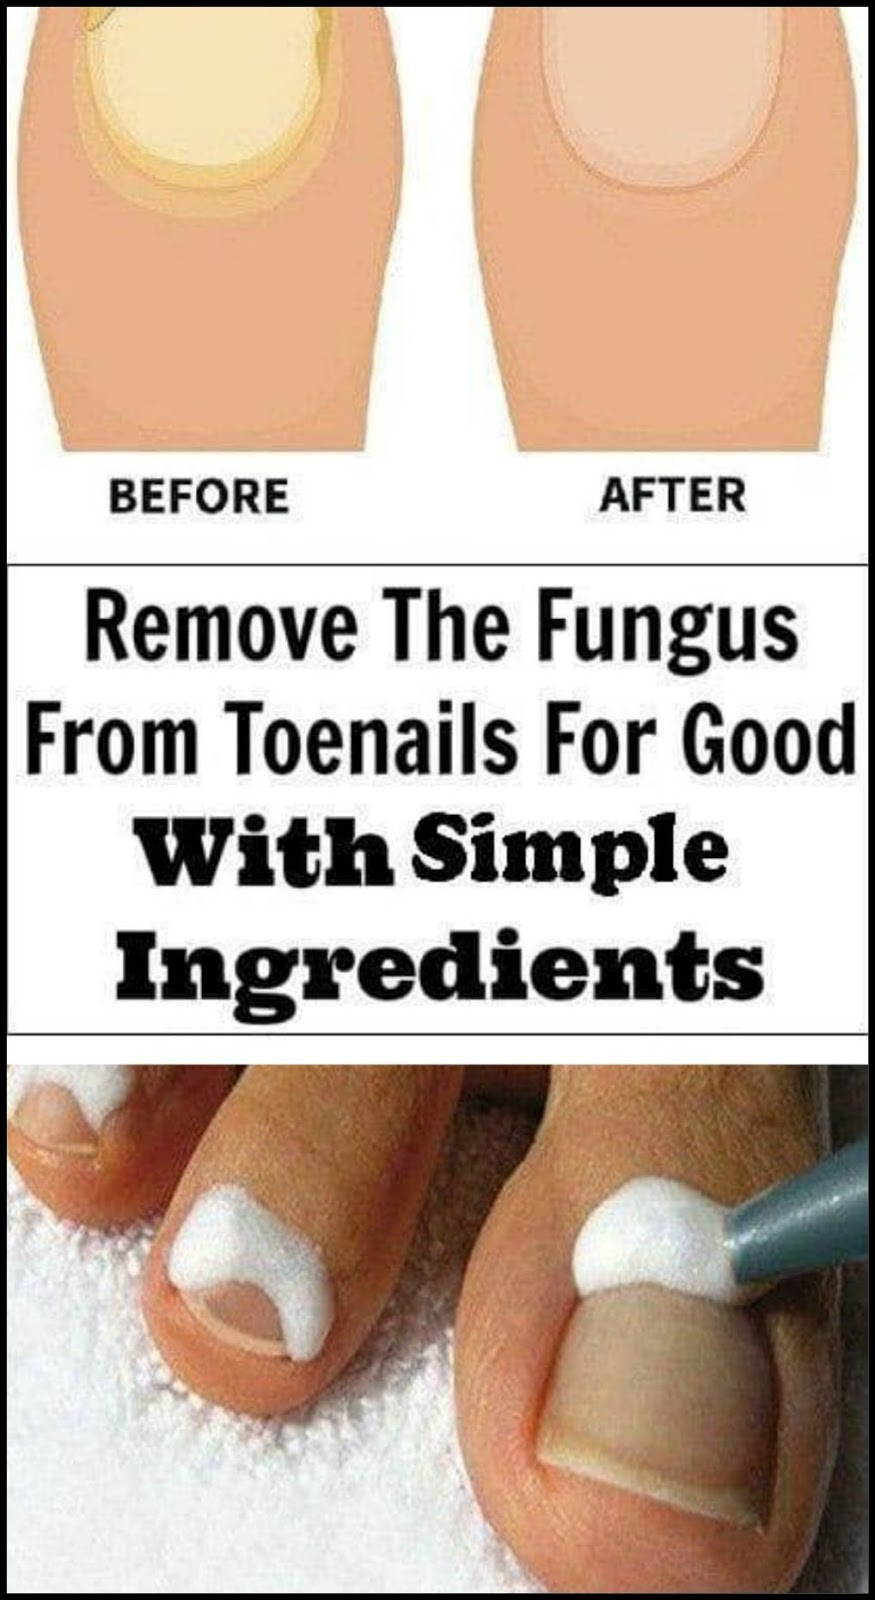 9 Simple Ingredients to Remove The Fungus From Toenails